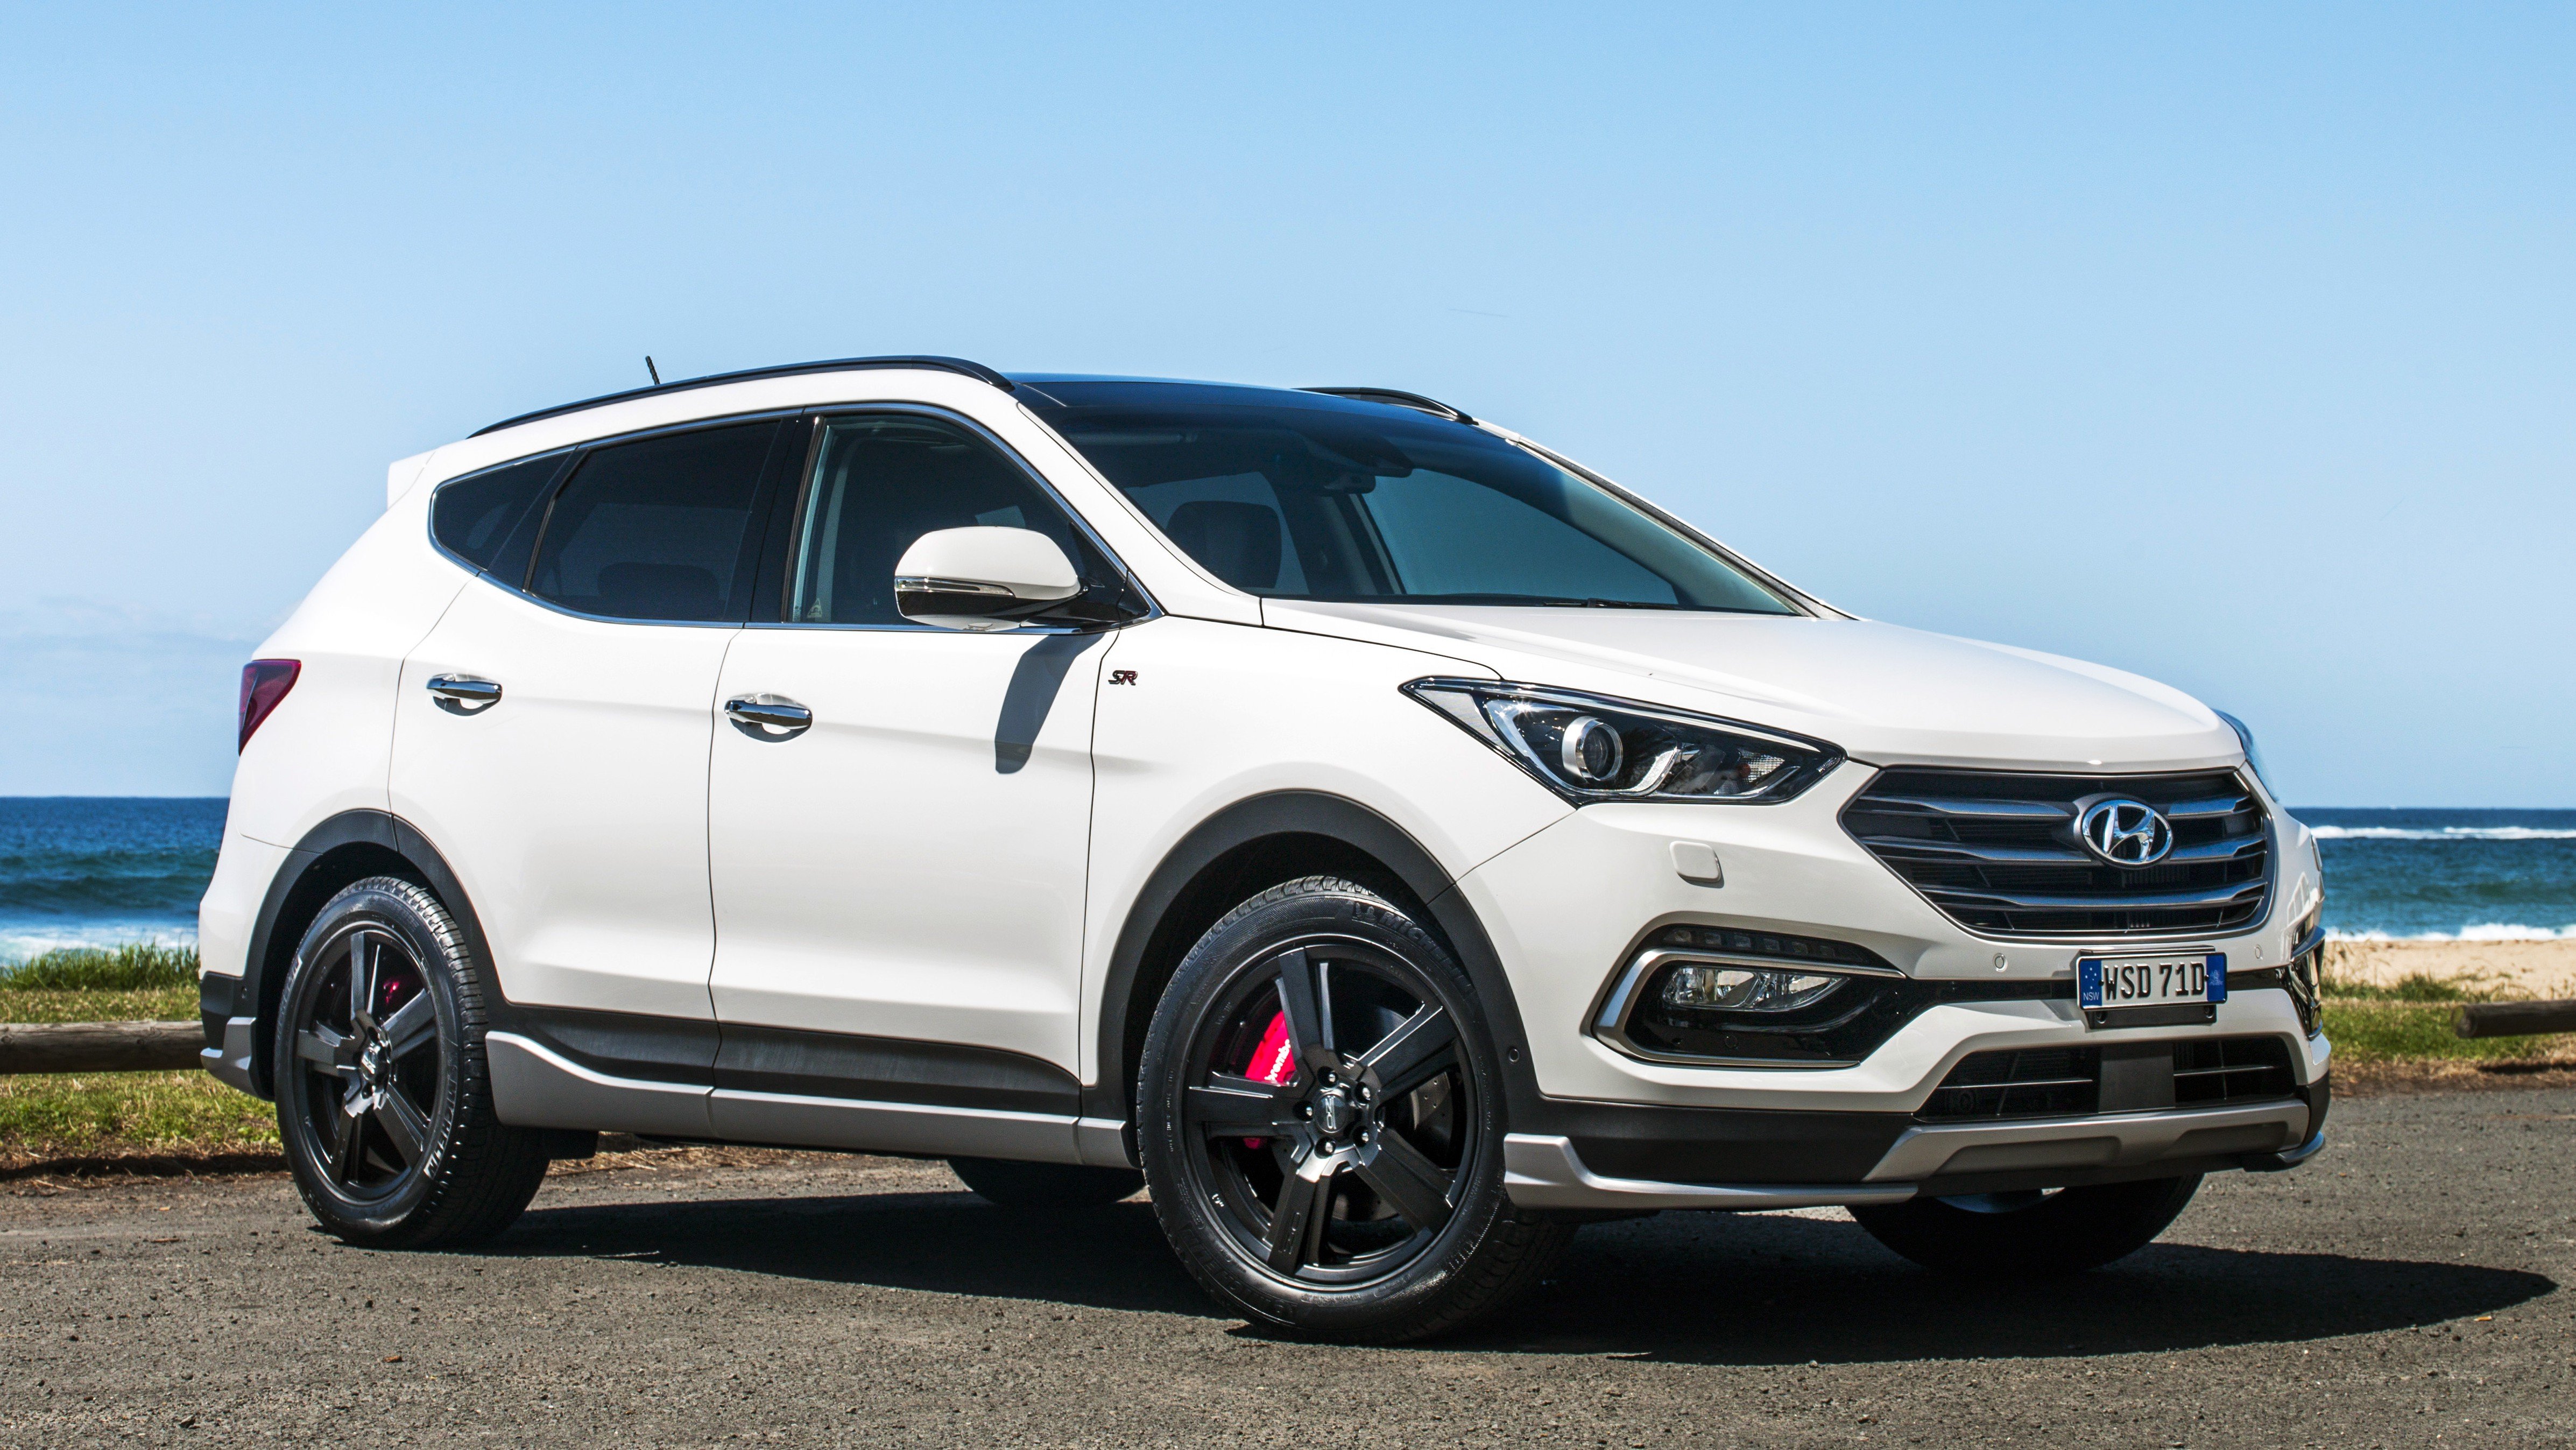 2016 Hyundai Santa Fe Series II pricing and specifications photos